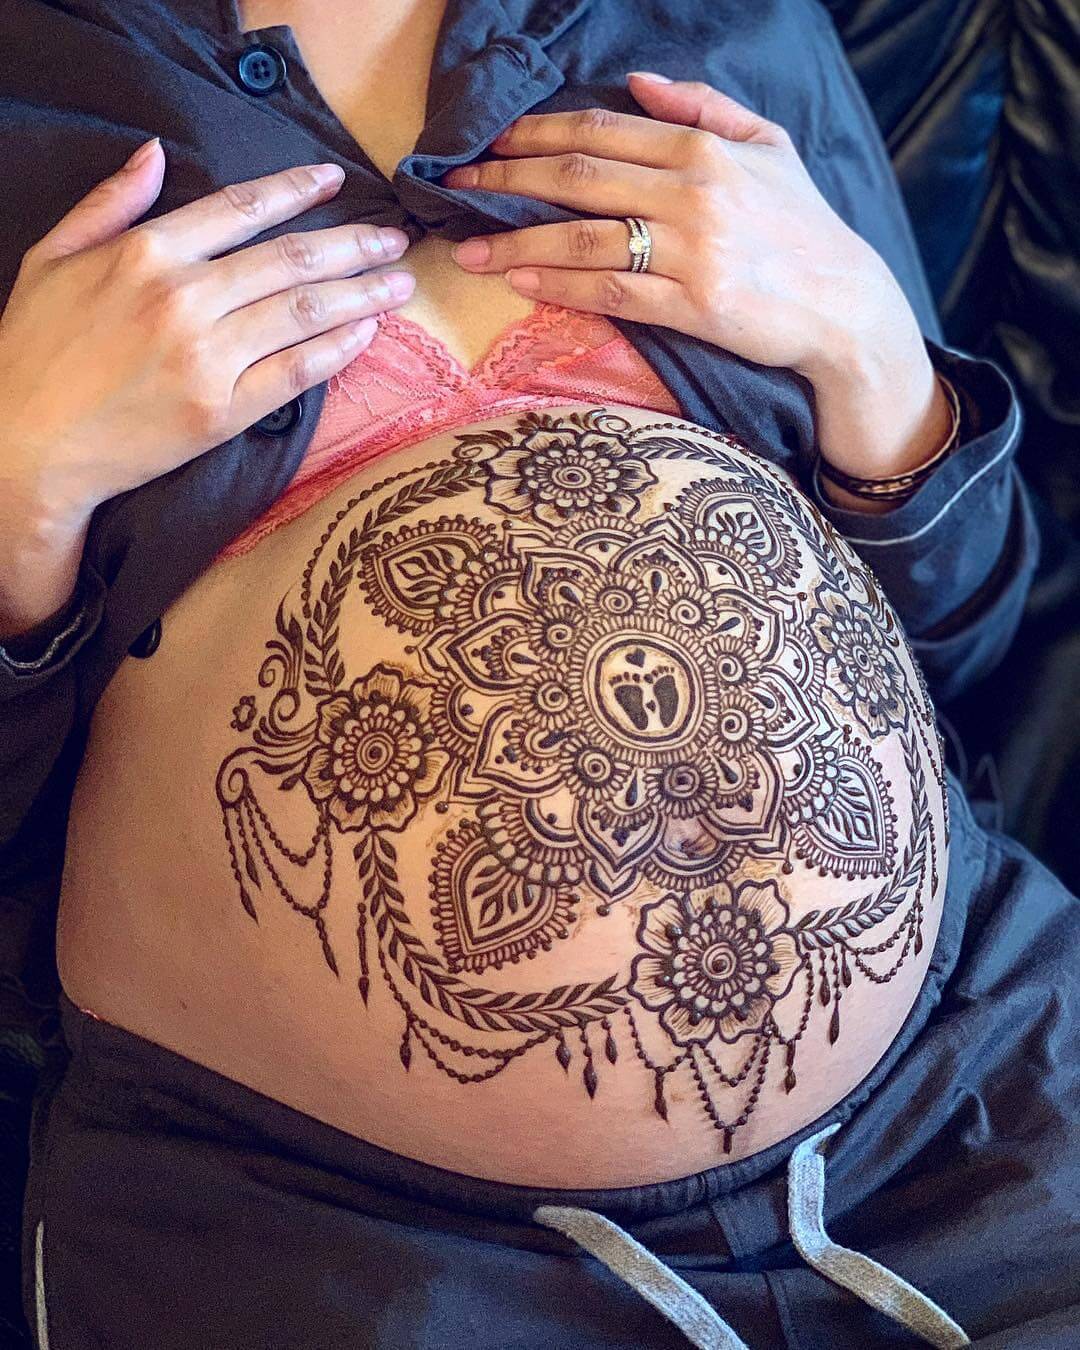 Footprints immersed in the sea of florals Amazing Pregnant Belly Henna Designs